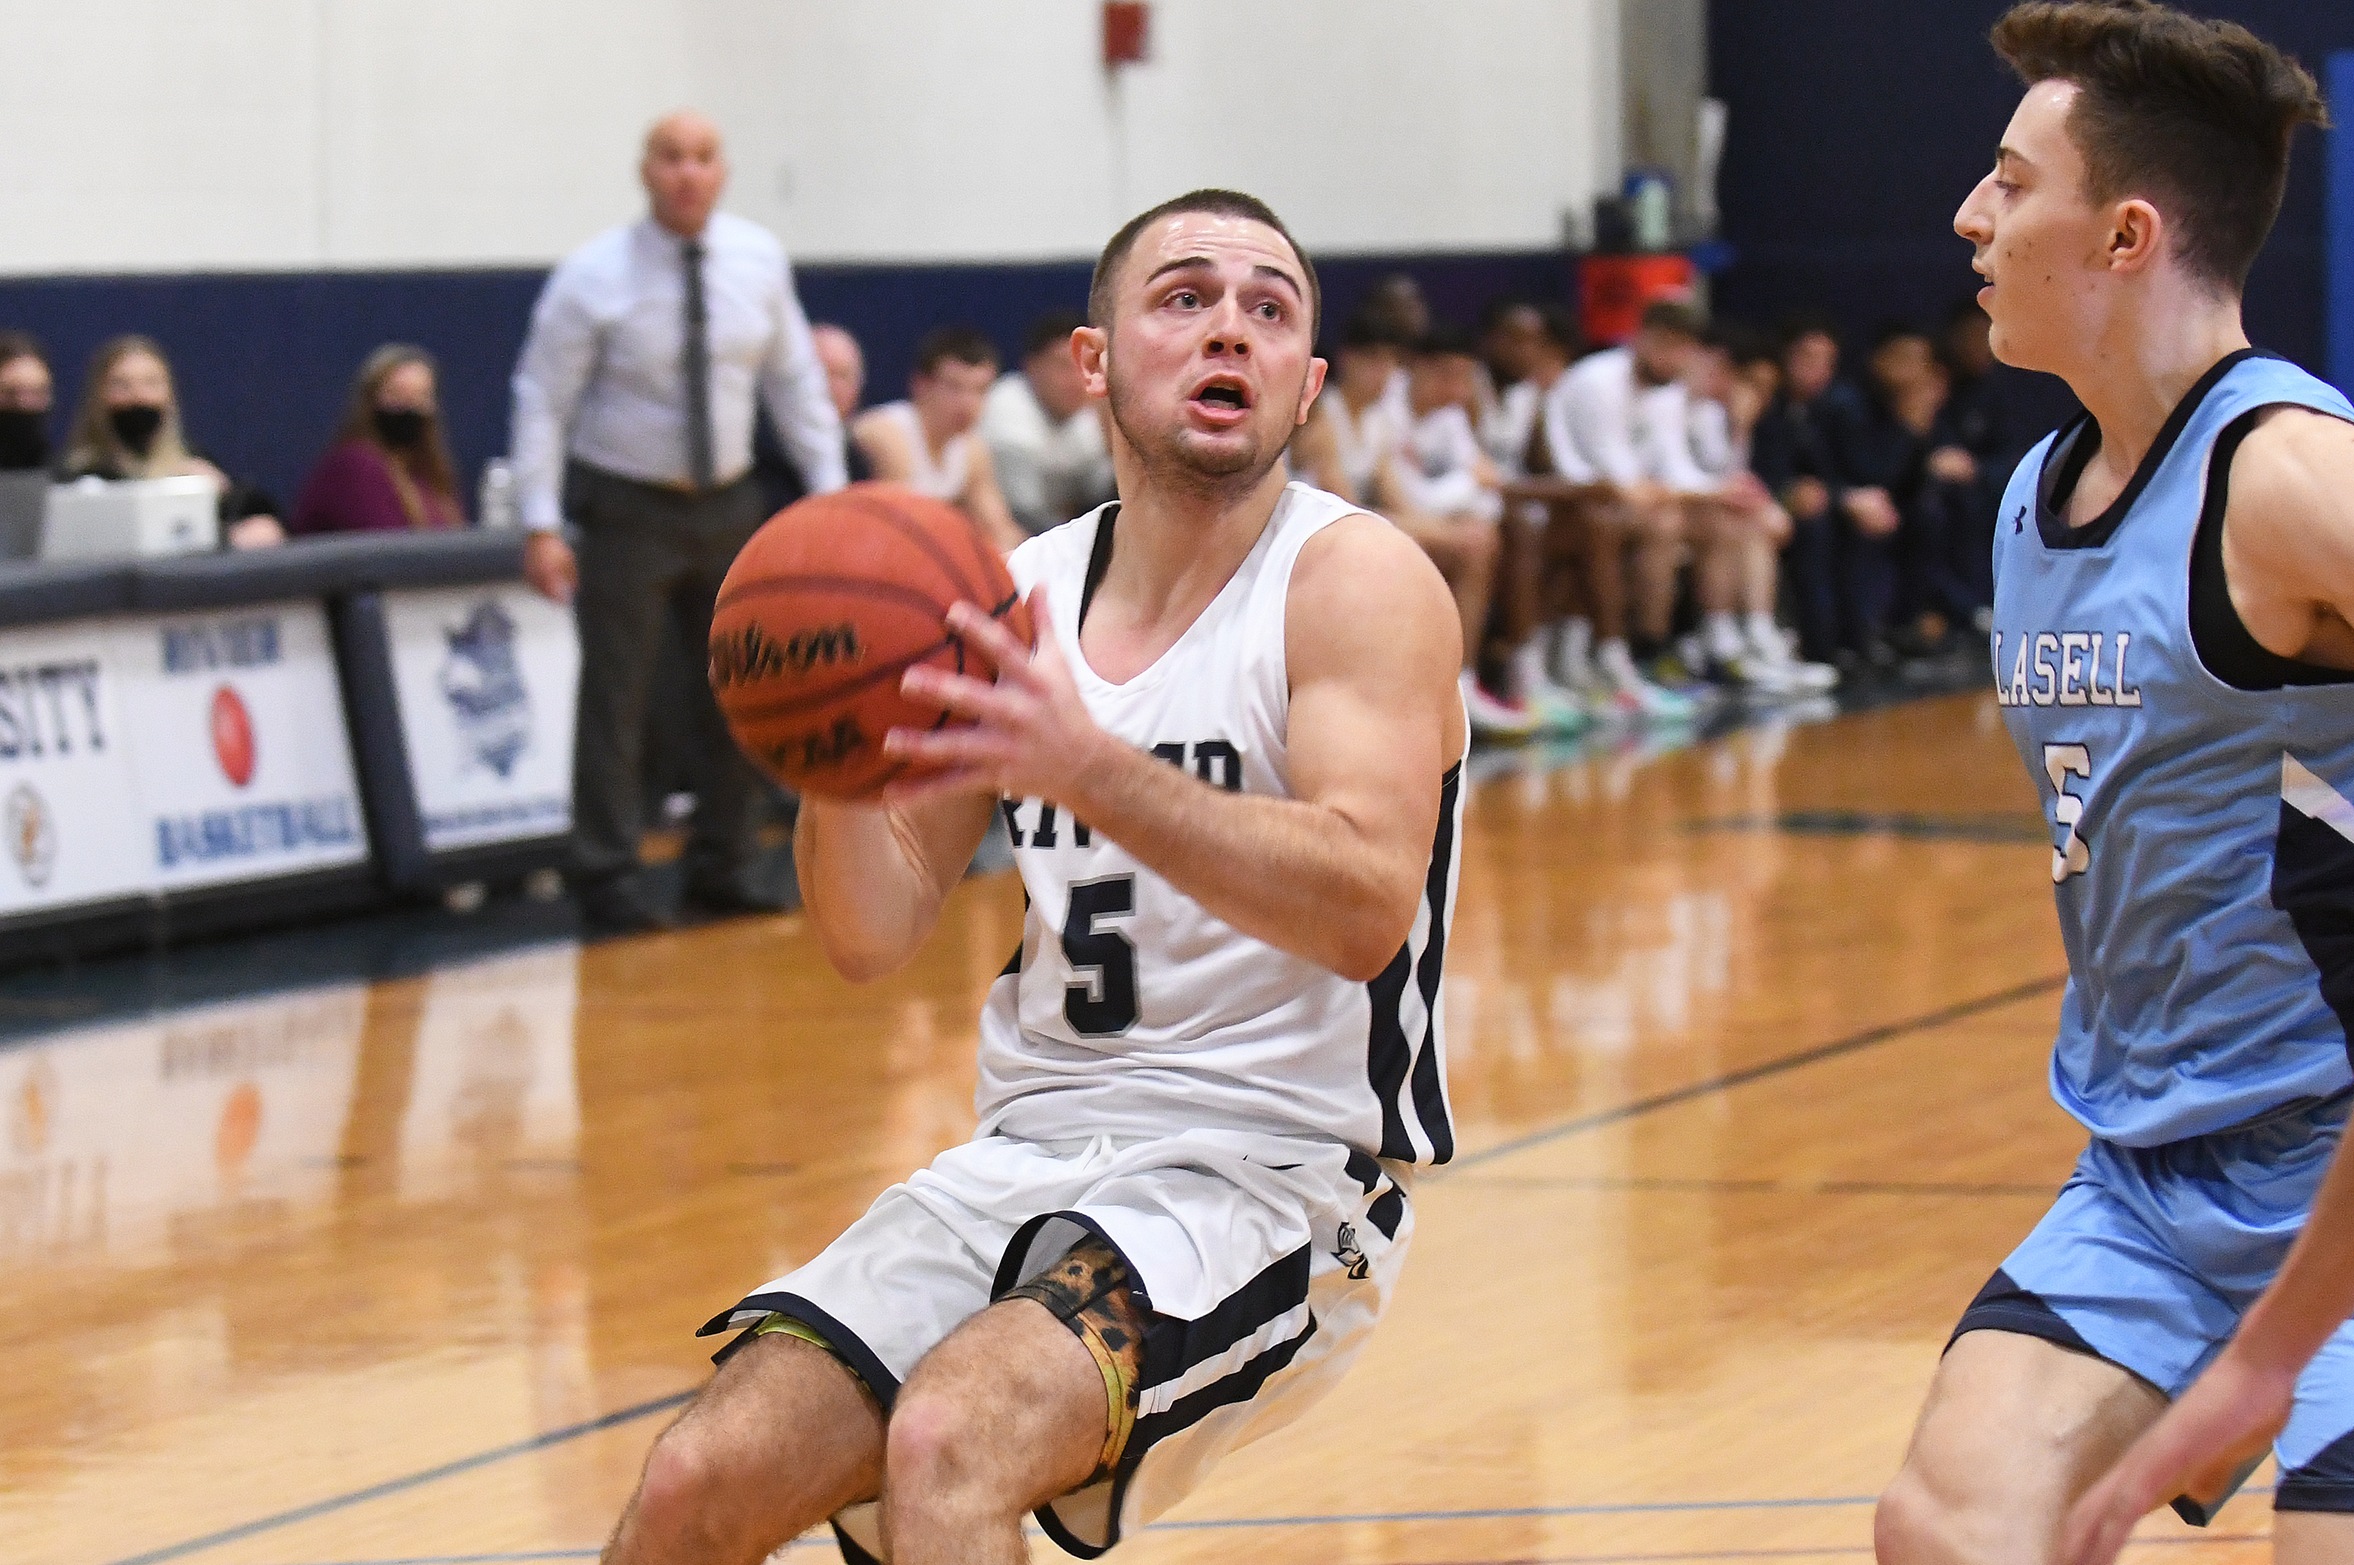 Pignone and Gillette Drop 20 in Loss to Monks